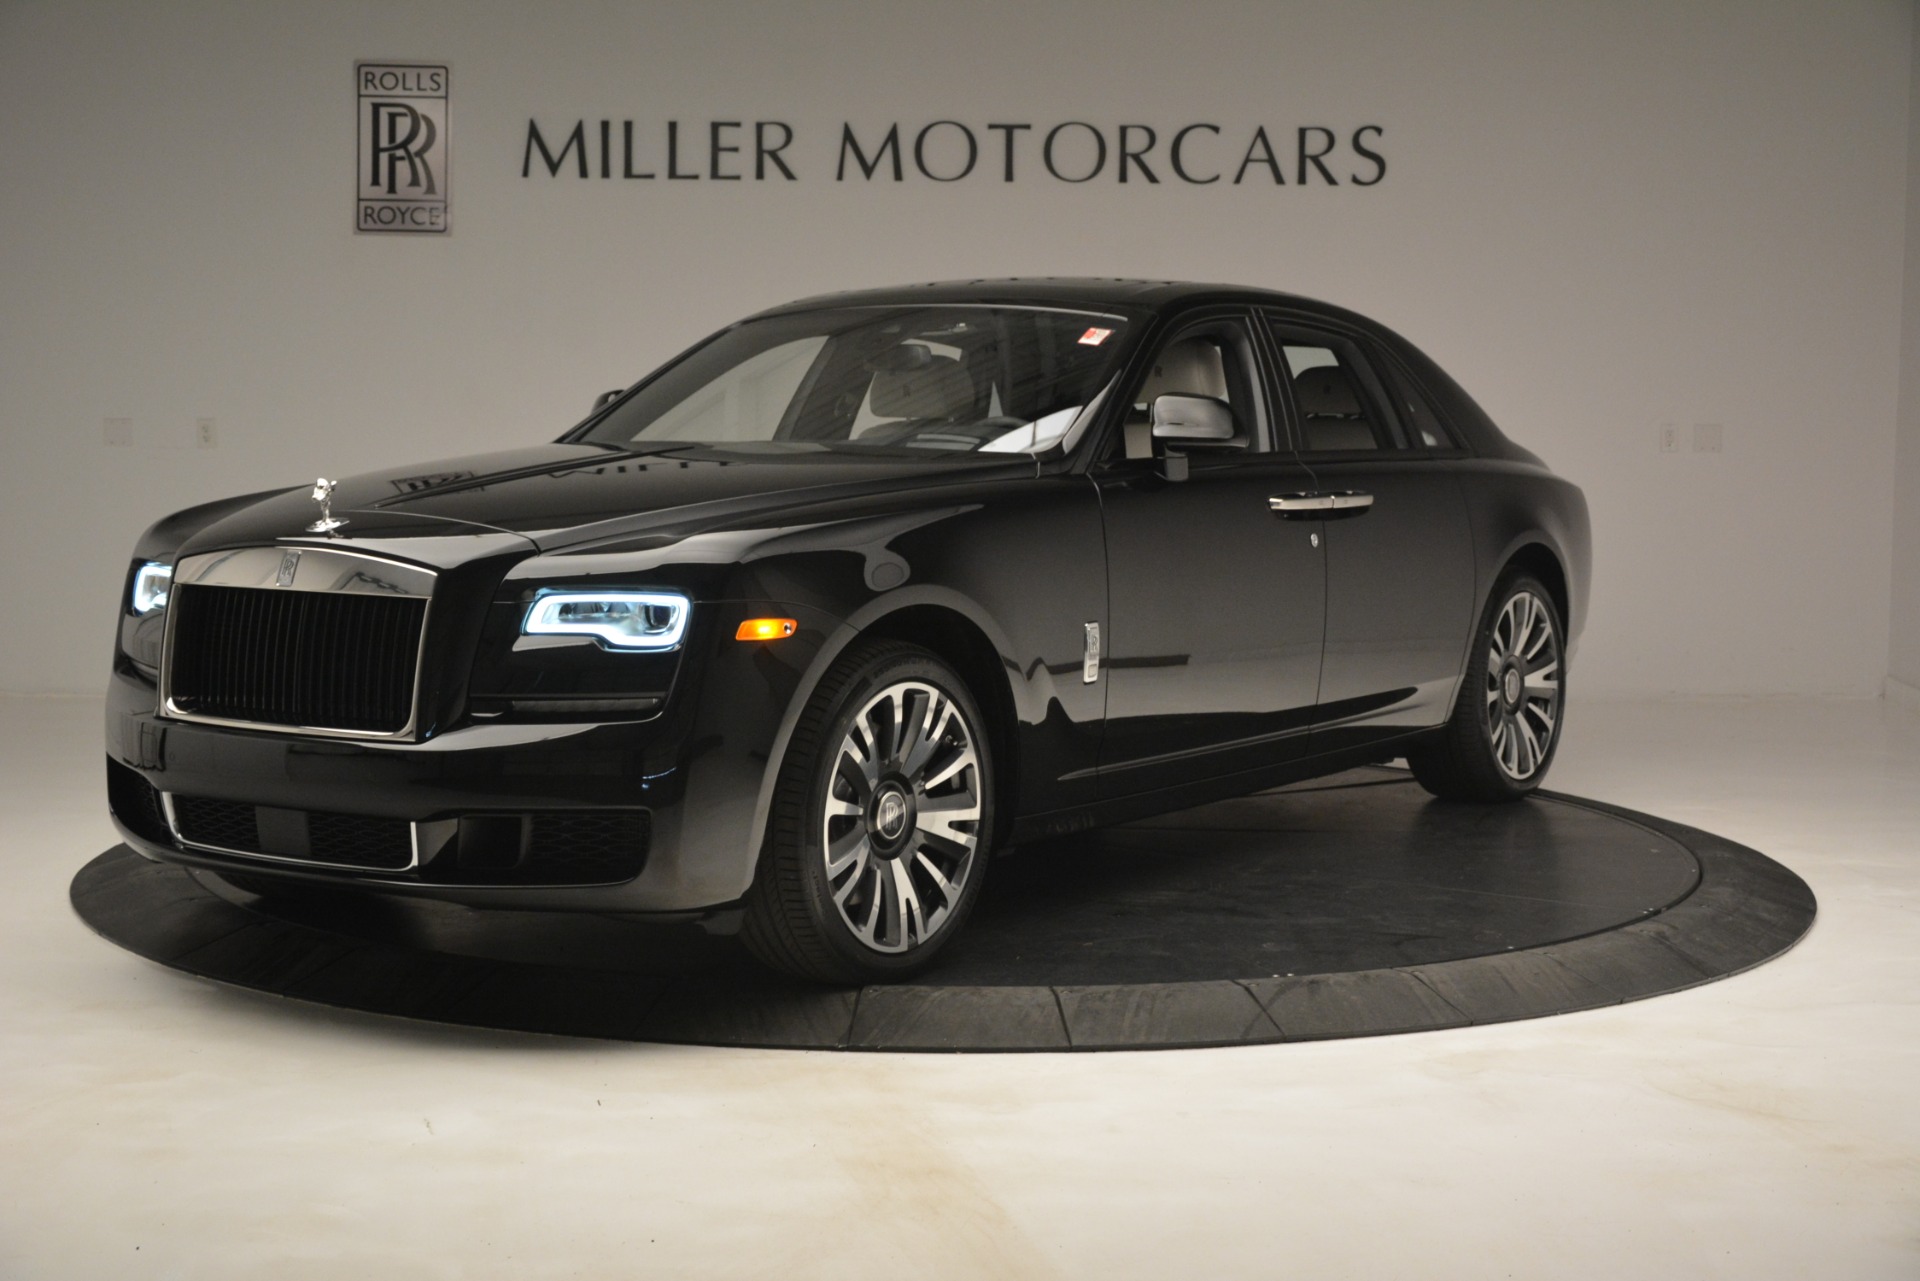 New 2019 Rolls-Royce Ghost for sale Sold at Bentley Greenwich in Greenwich CT 06830 1